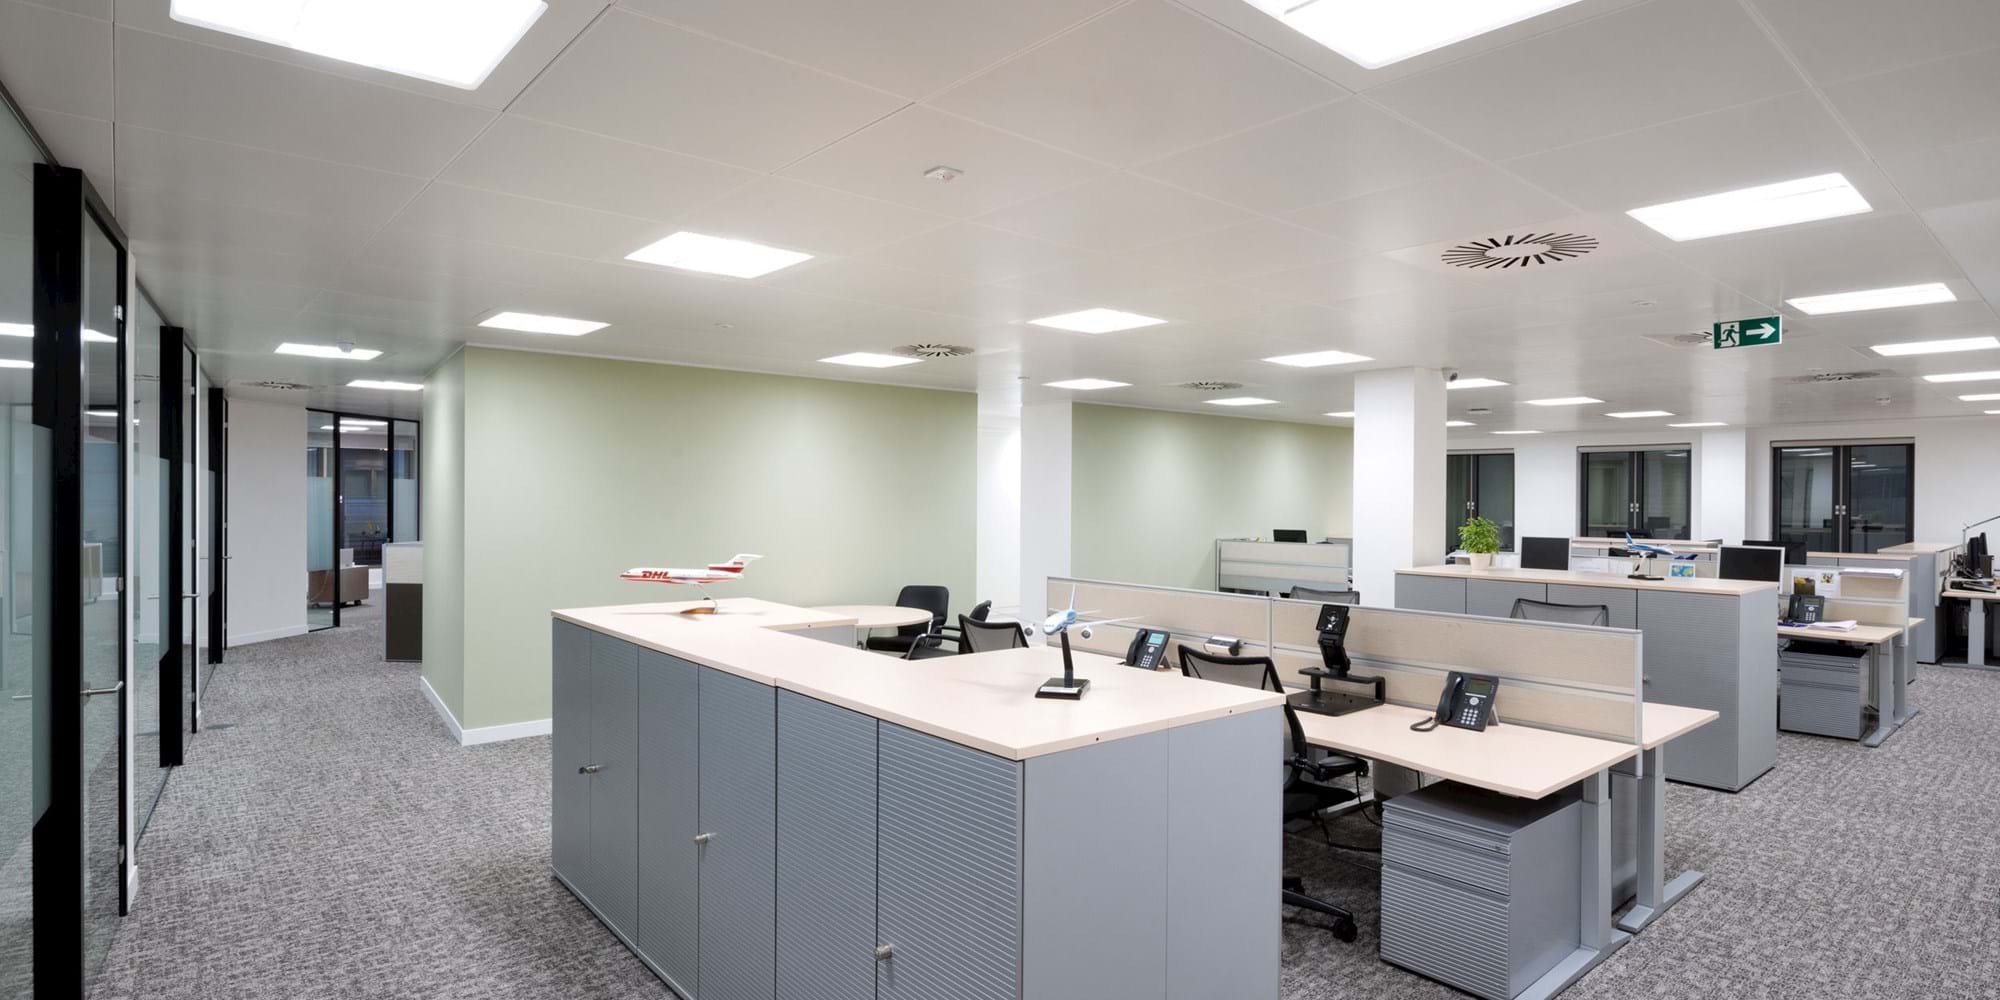 Modus Workspace office design, fit out and refurbishment - DPDHL - Open Plan Office - DHL 04 highres sRGB.jpg